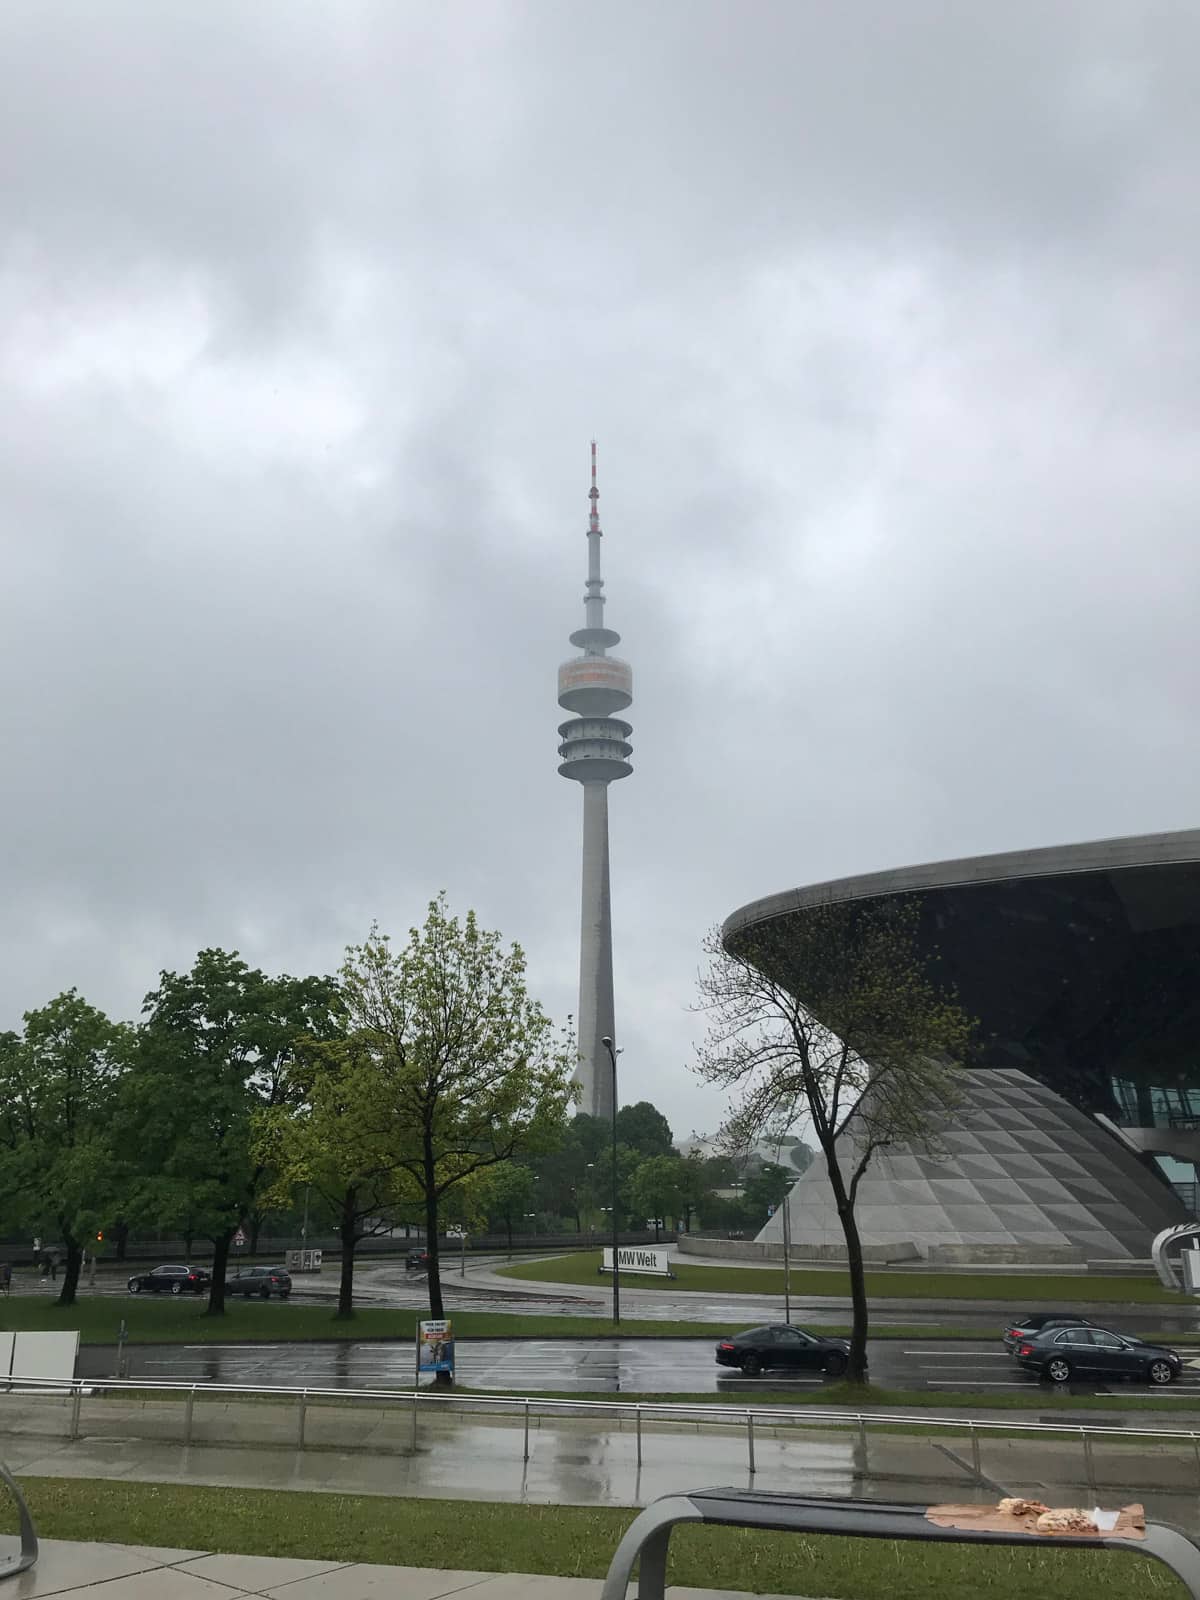 A television tower on a rainy day